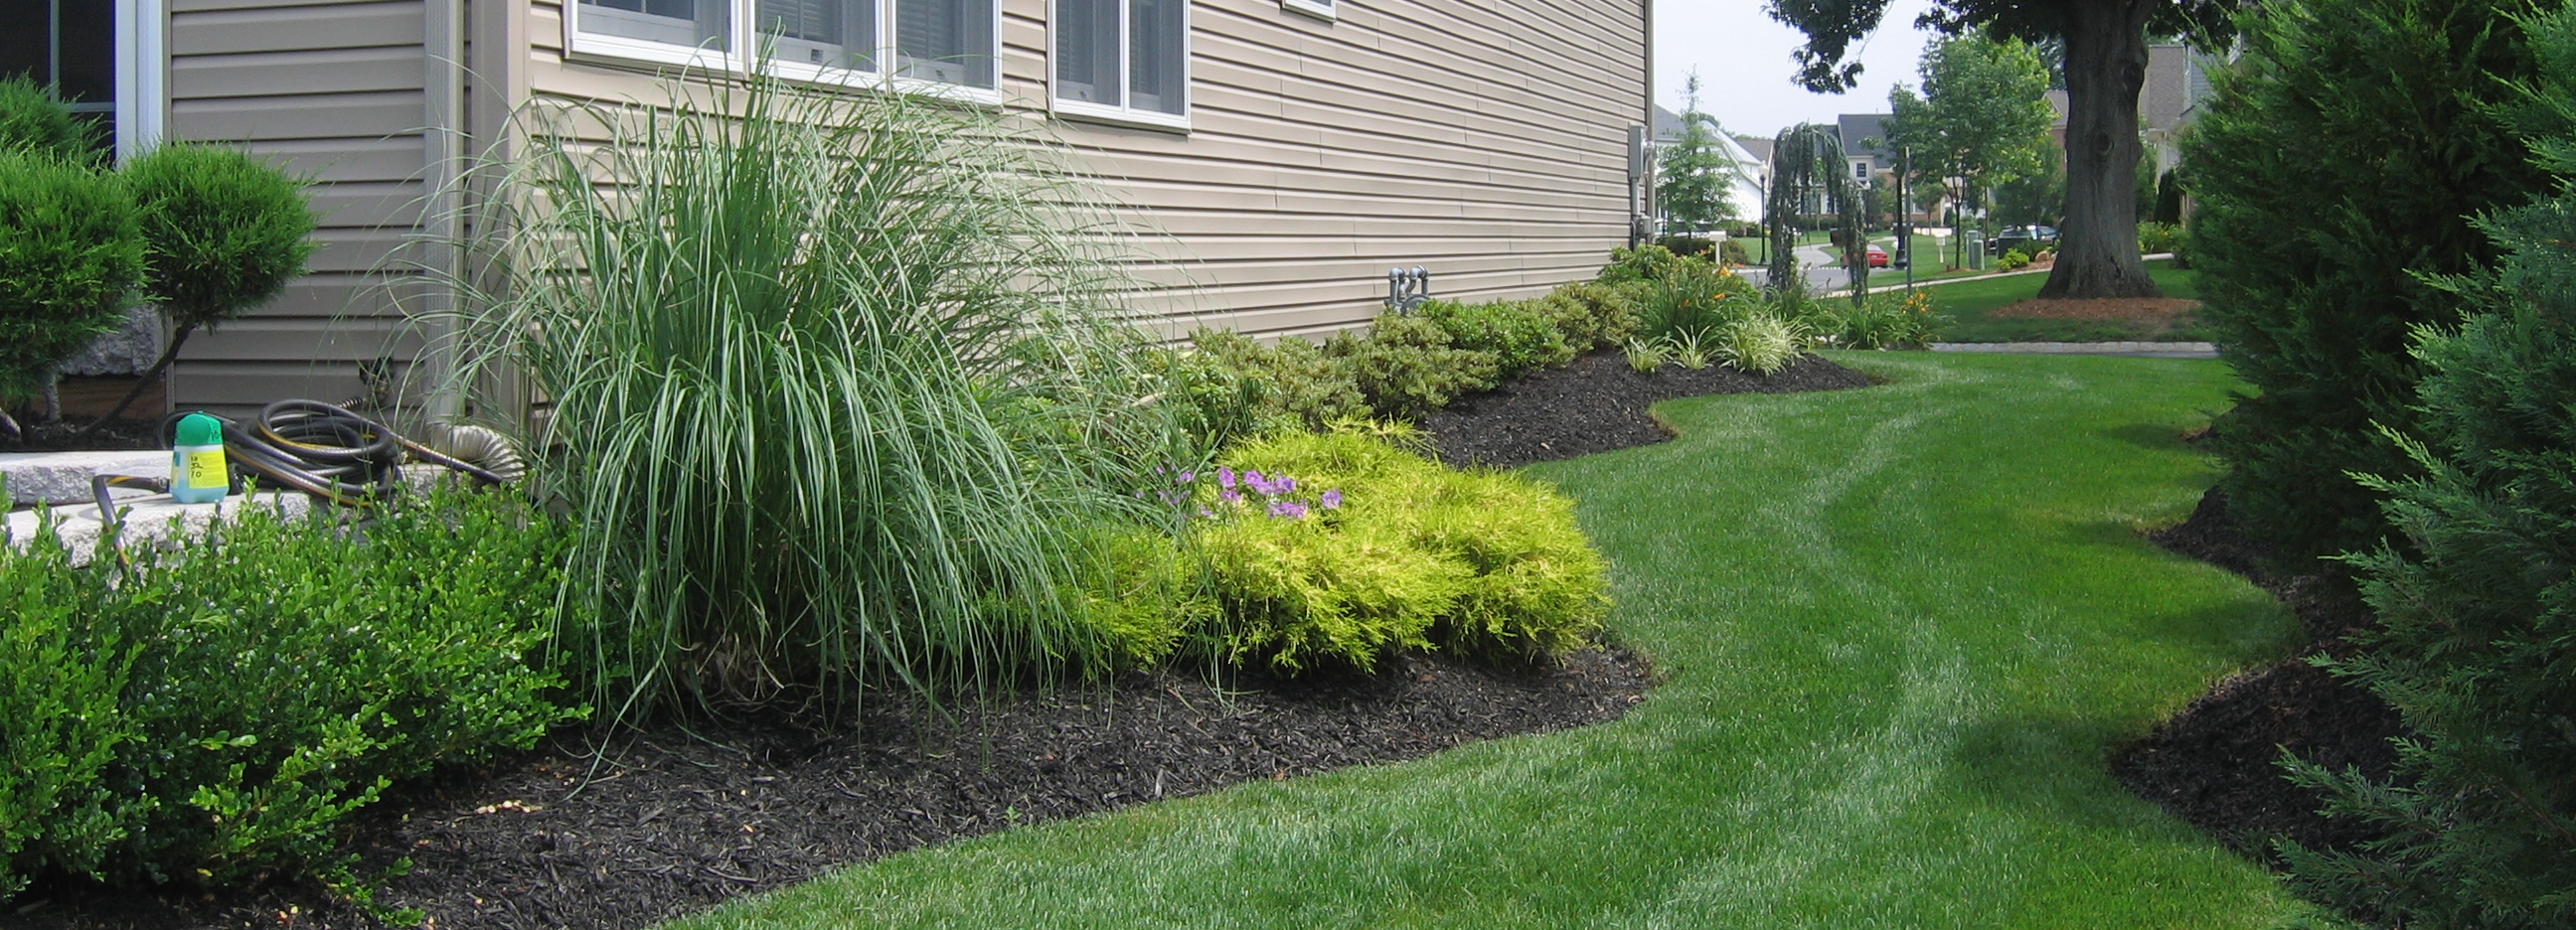 Jay S Landscaping Llc, Landscaping Companies In South Jersey